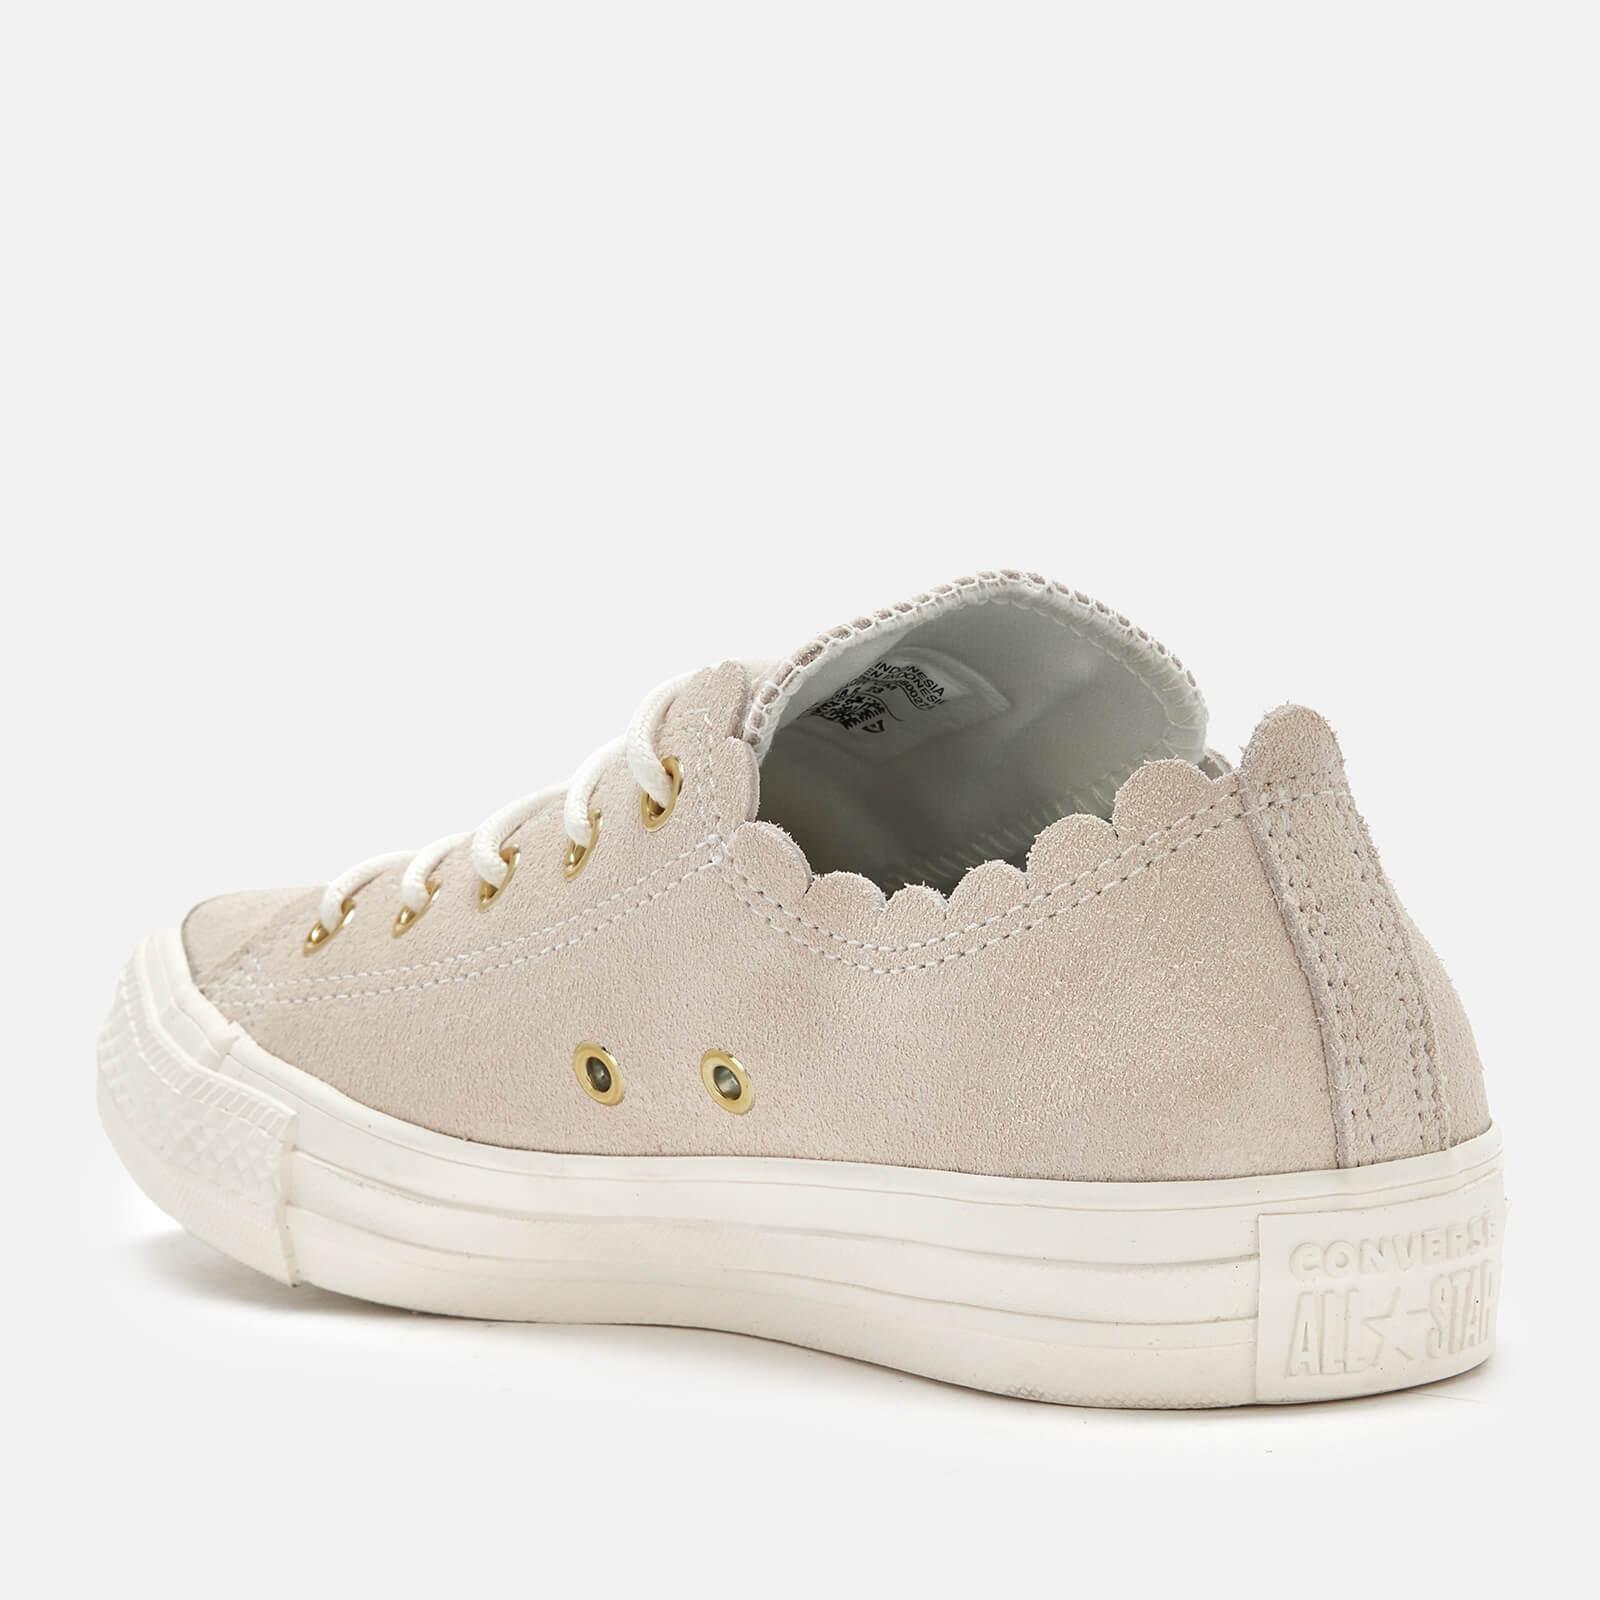 Converse Chuck Taylor All Star Scalloped Edge Ox Trainers in Natural | Lyst